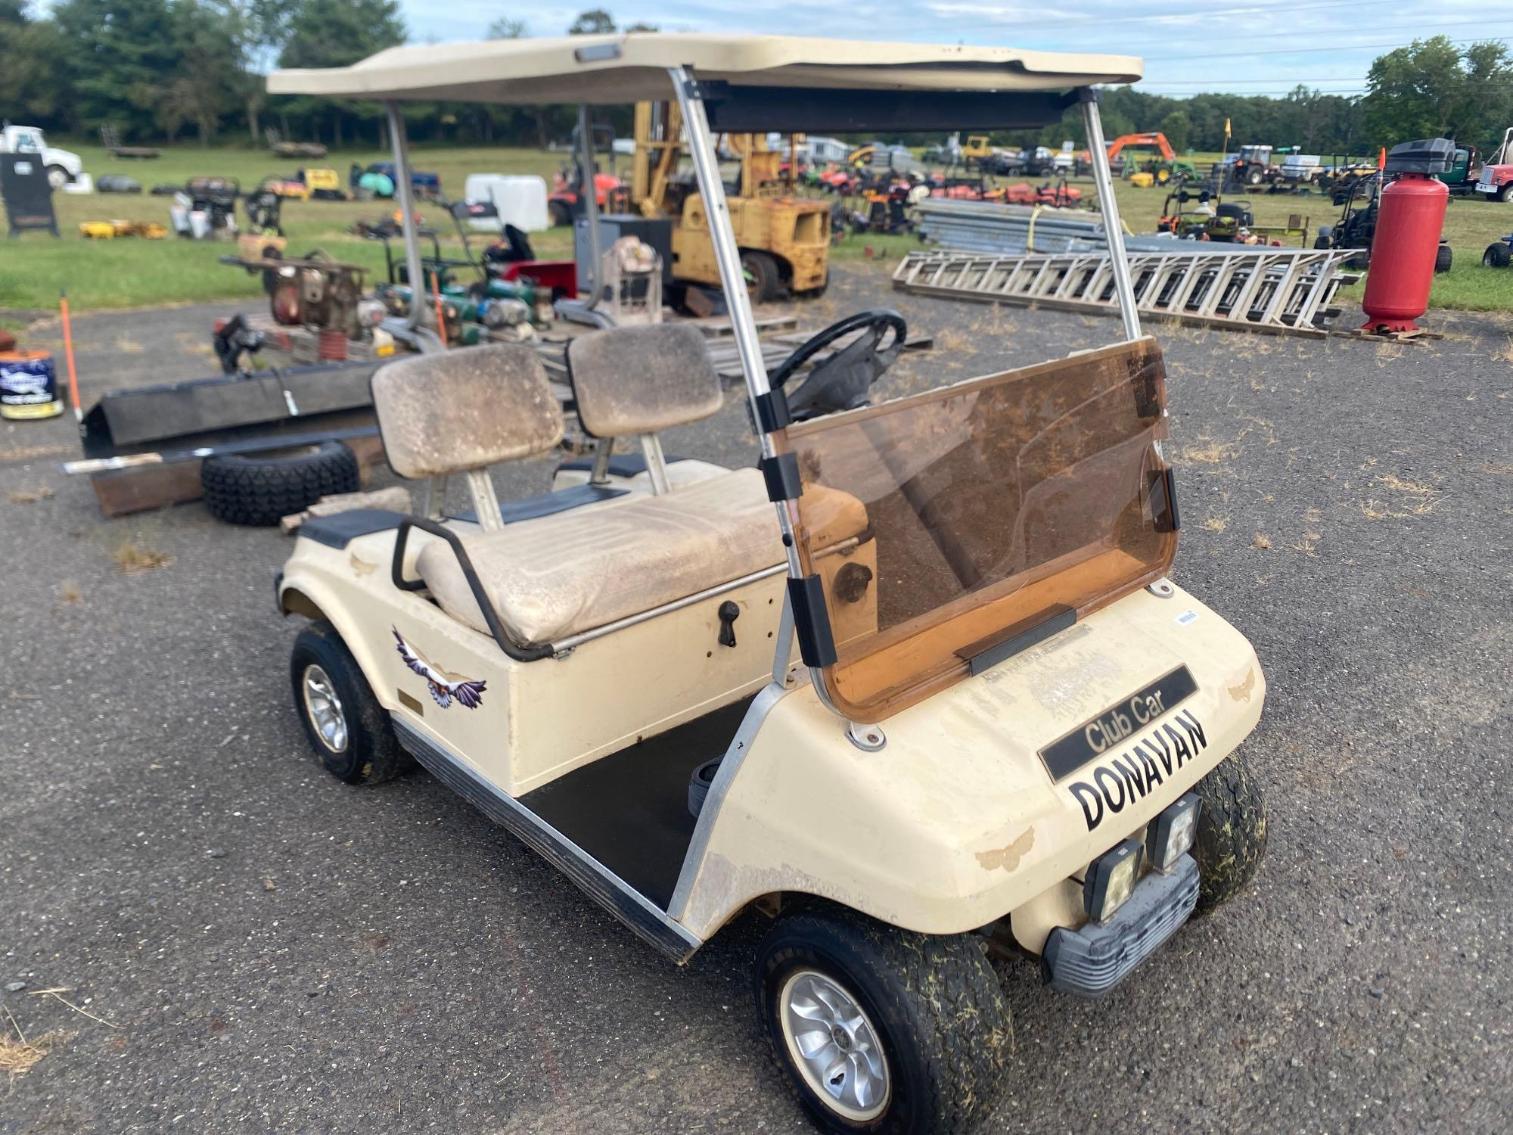 Image for Club Car Golf Cart, Per seller- new battery, new carb, new fuel filter